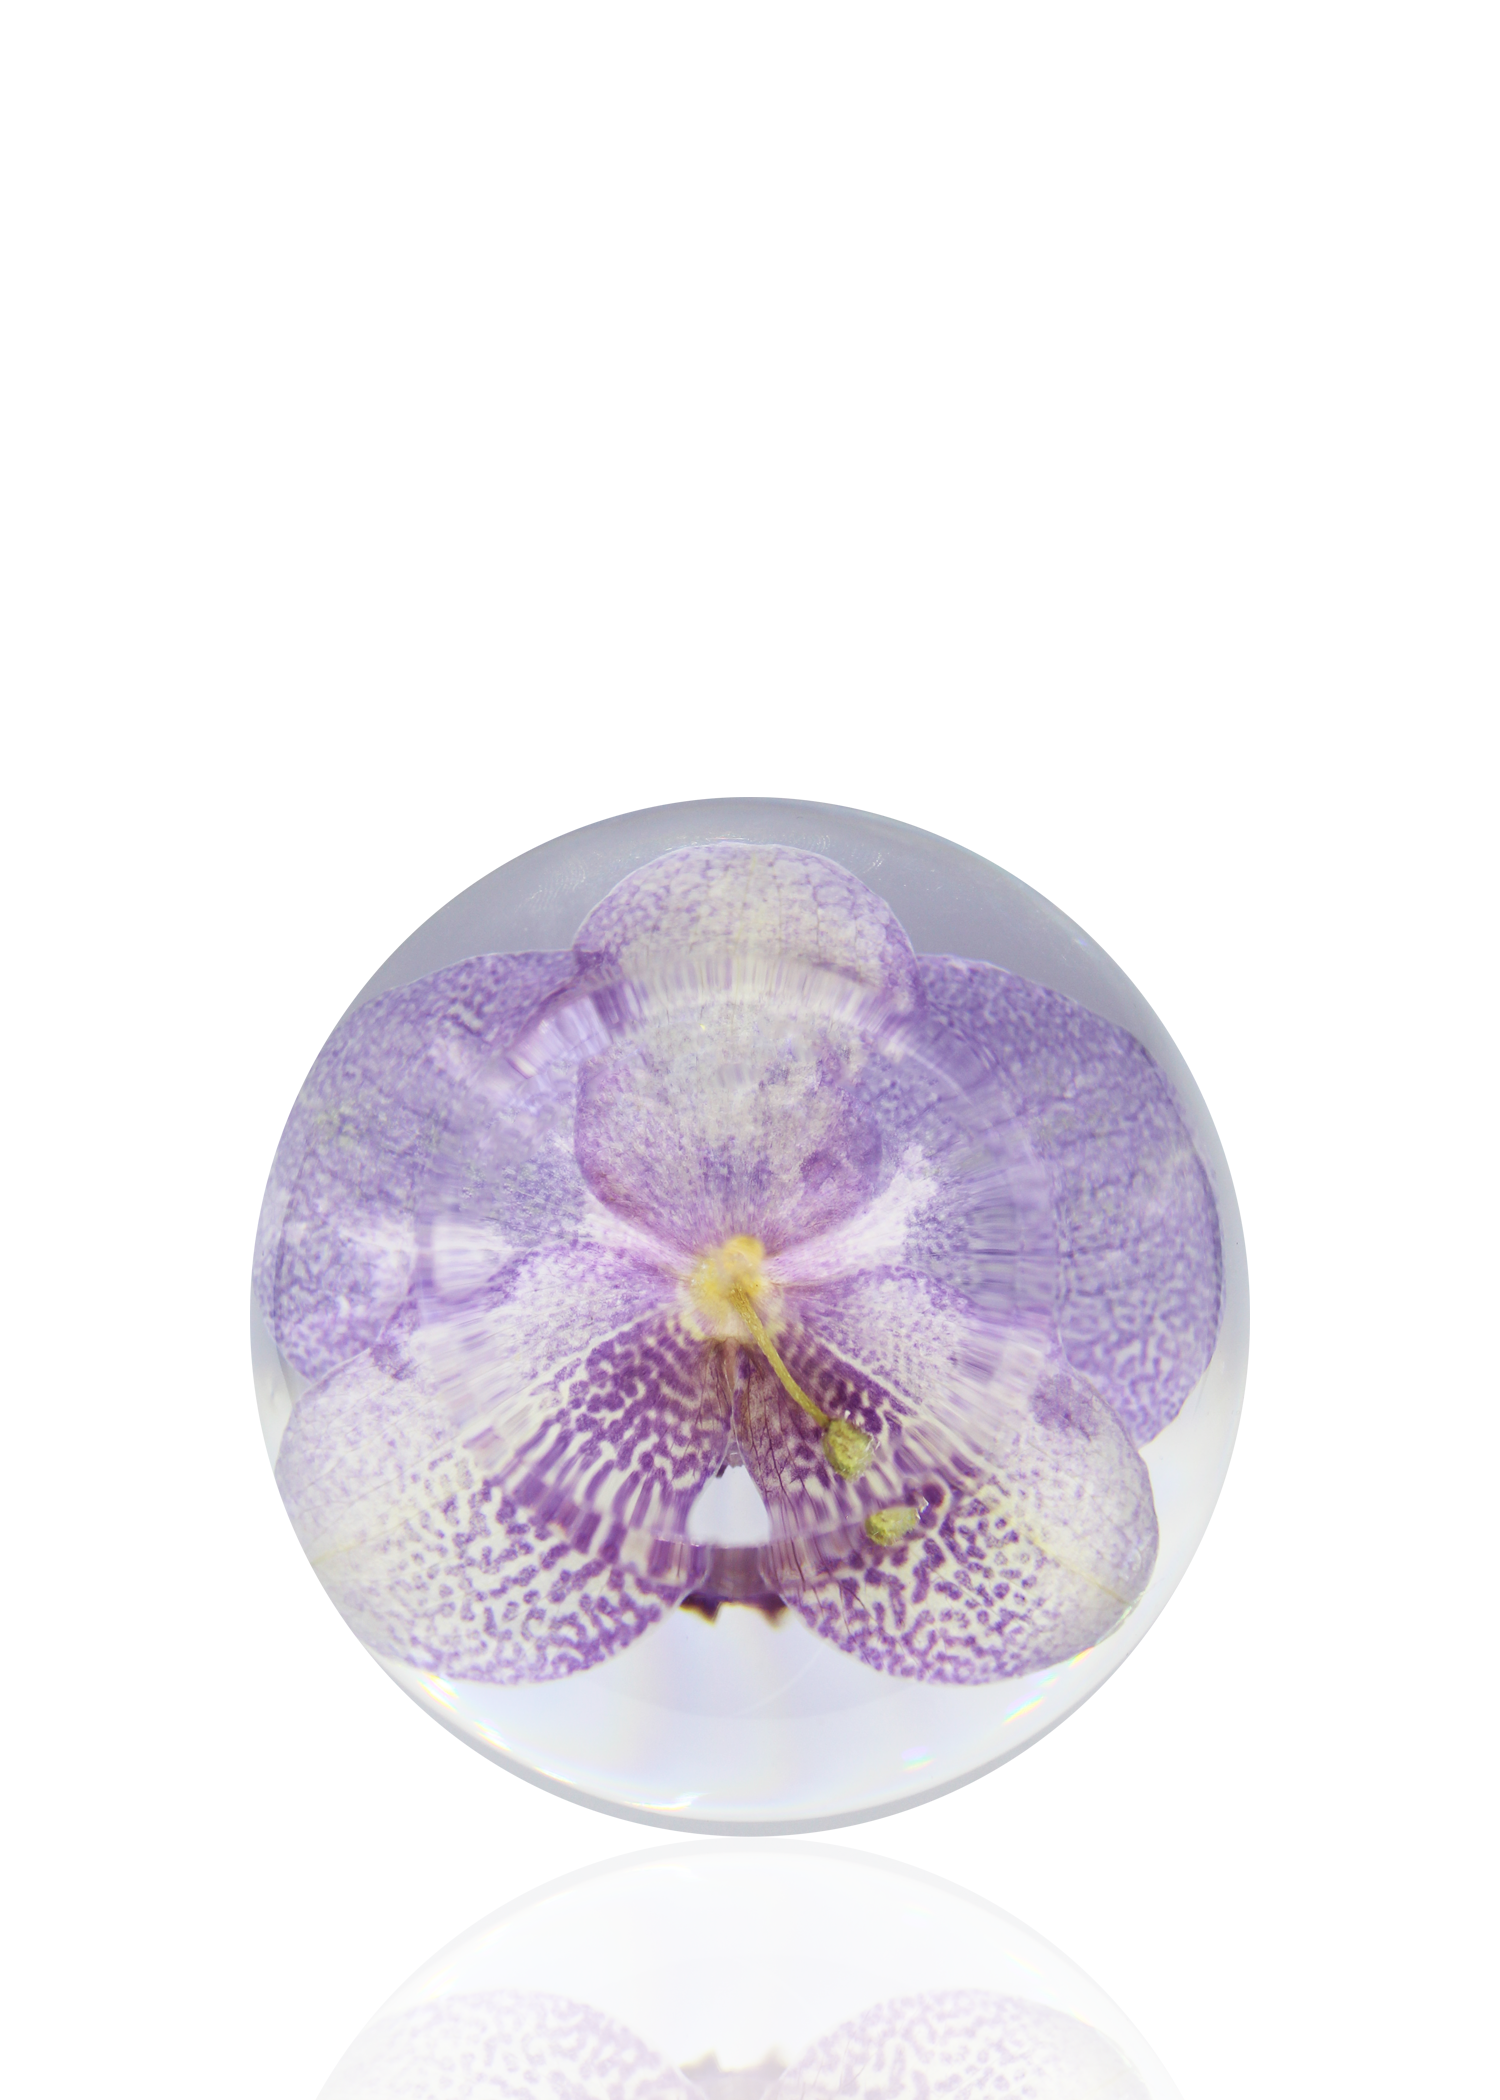 Crystal ball encapsulating a full preserved purple orchid